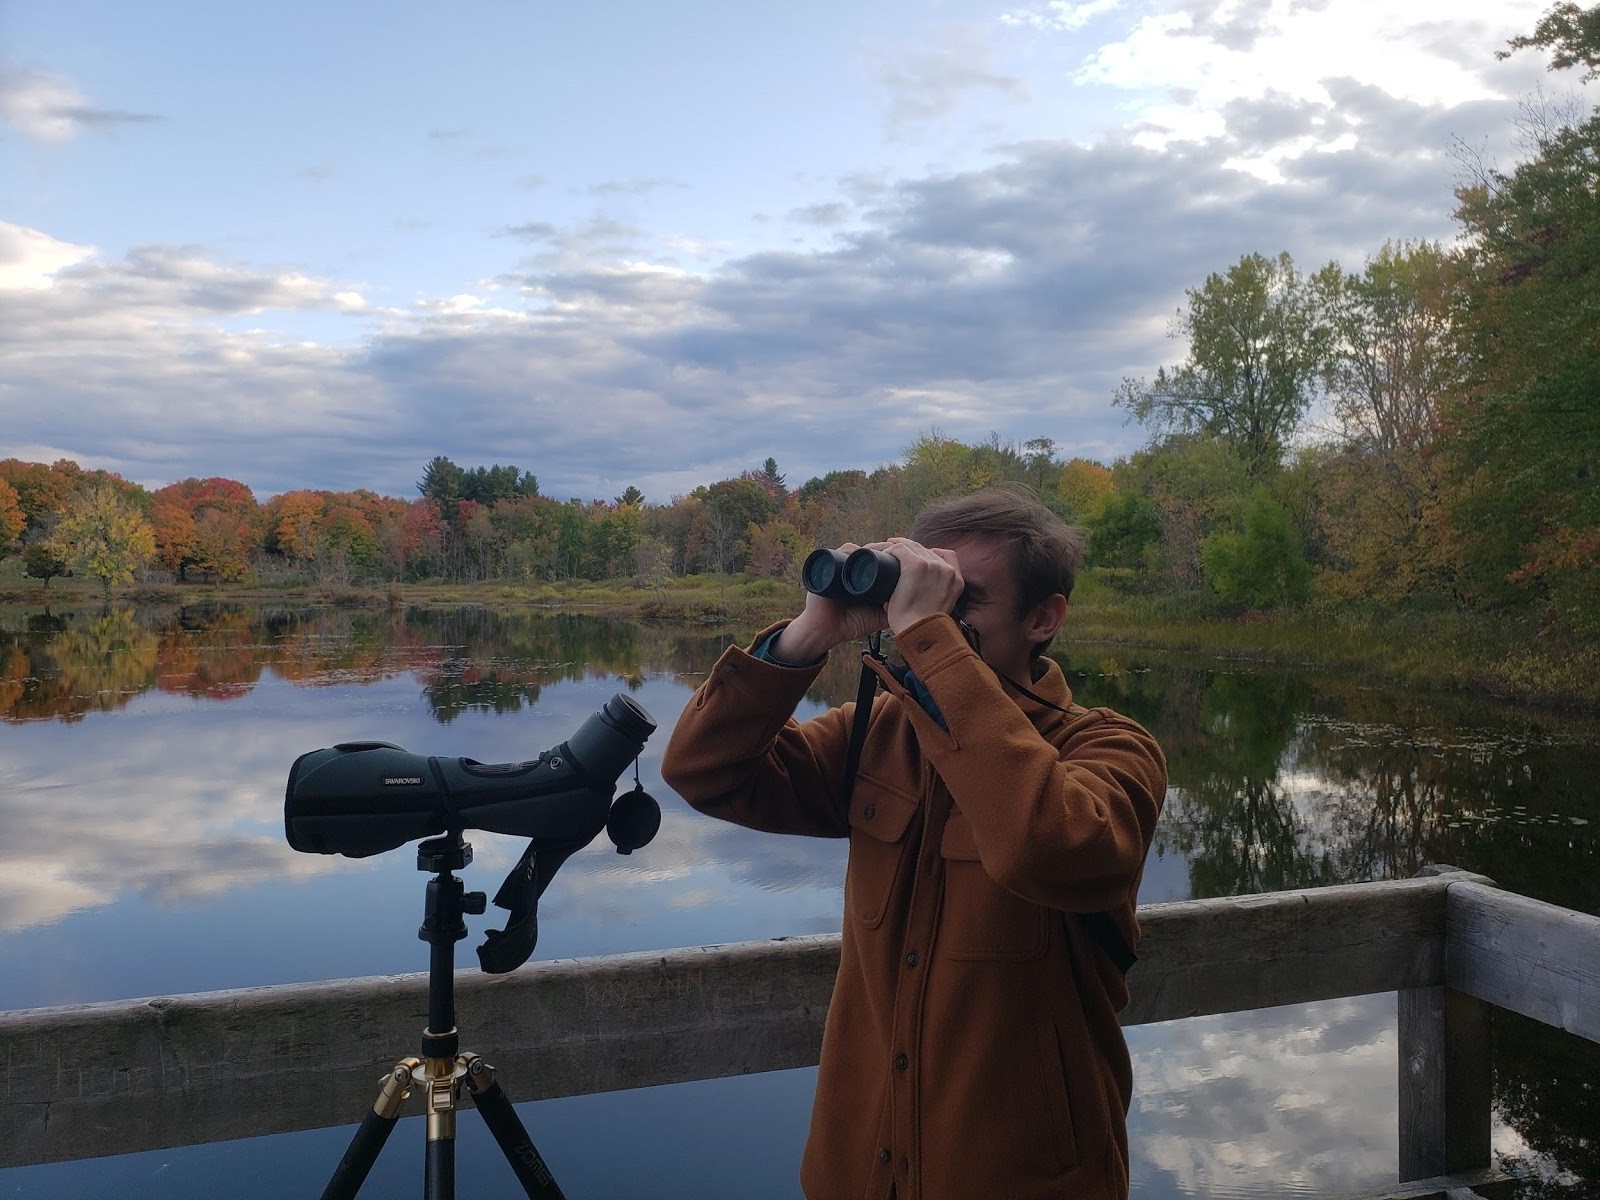 A man stands on a wooden deck using binoculars to look into the distance while a spotting scope is mounted on a tripod in front of him. In the background is a body of water, surrounded by trees.